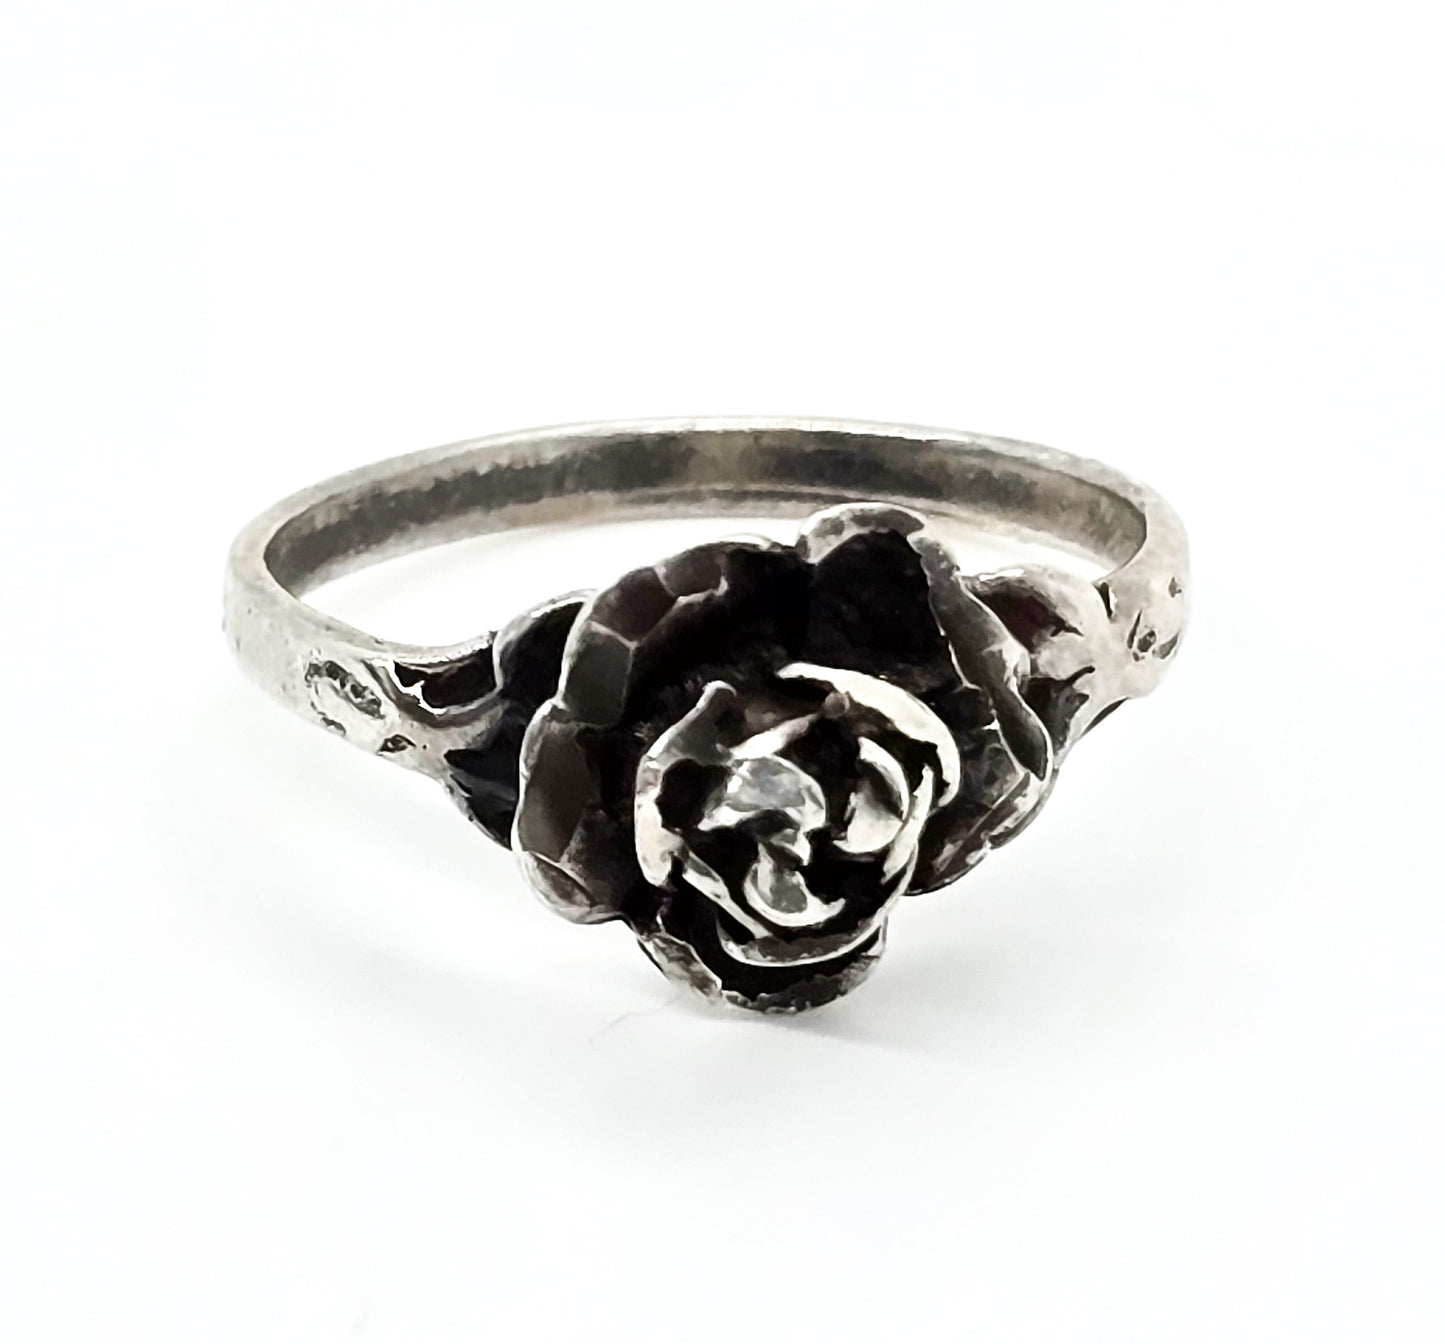 Blooming rose vintage sterling silver flower ring Signed He size 9